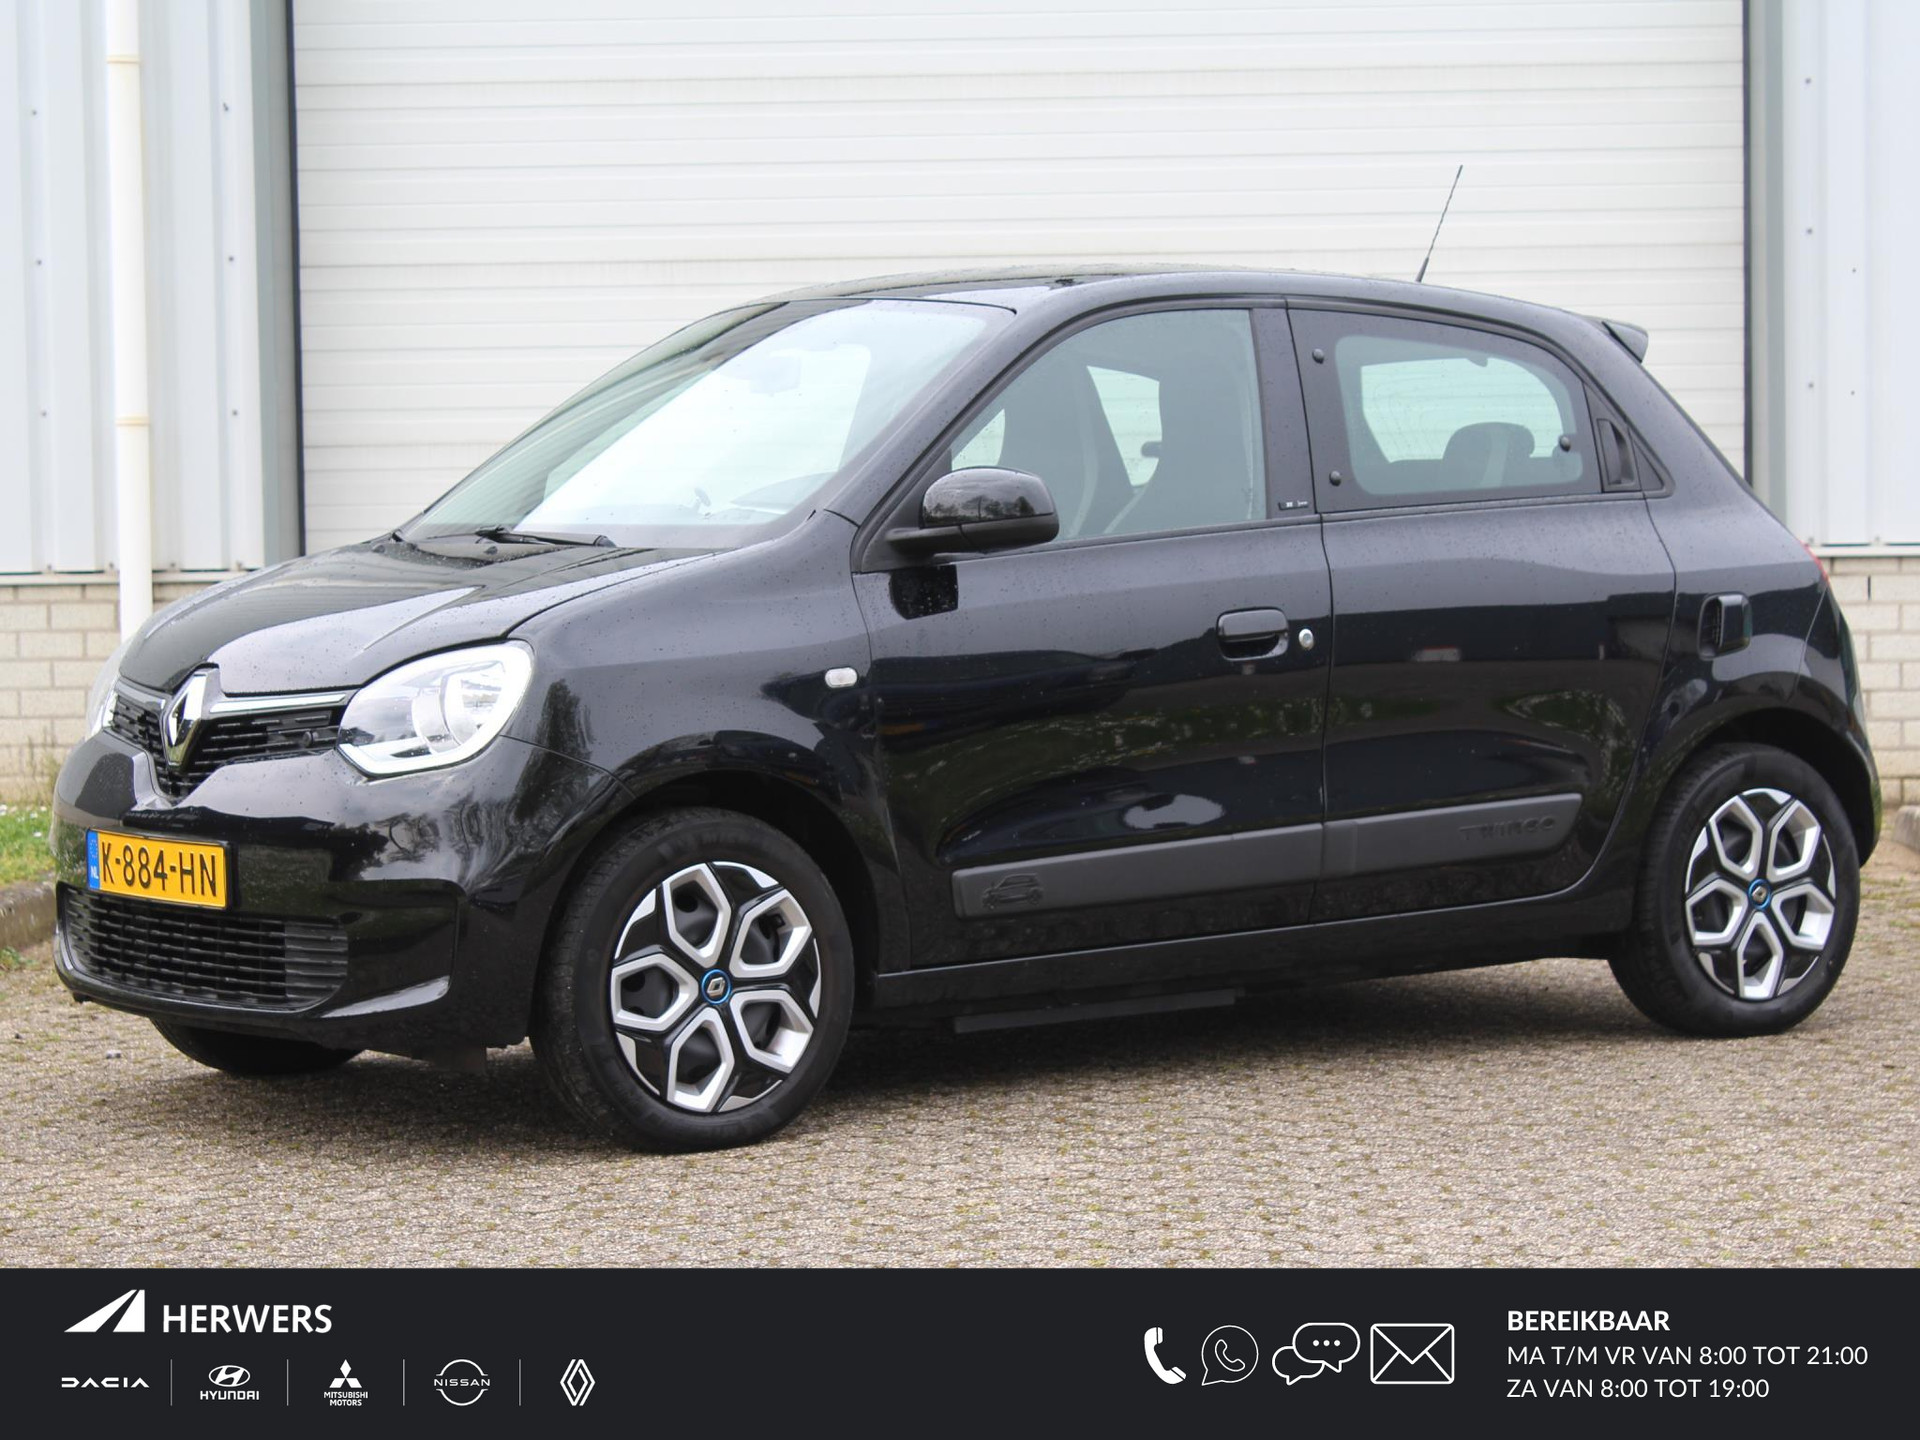 Renault Twingo Z.E. R80 Collection / SUBSIDIE  € 2000,- mogelijk / AUTOMAAT / Navigatiesysteem / Airco / Apple Car Play & Android Auto / DAB / Led dagrijverlichting / Metaalkleur / Cruise control bij viaBOVAG.nl